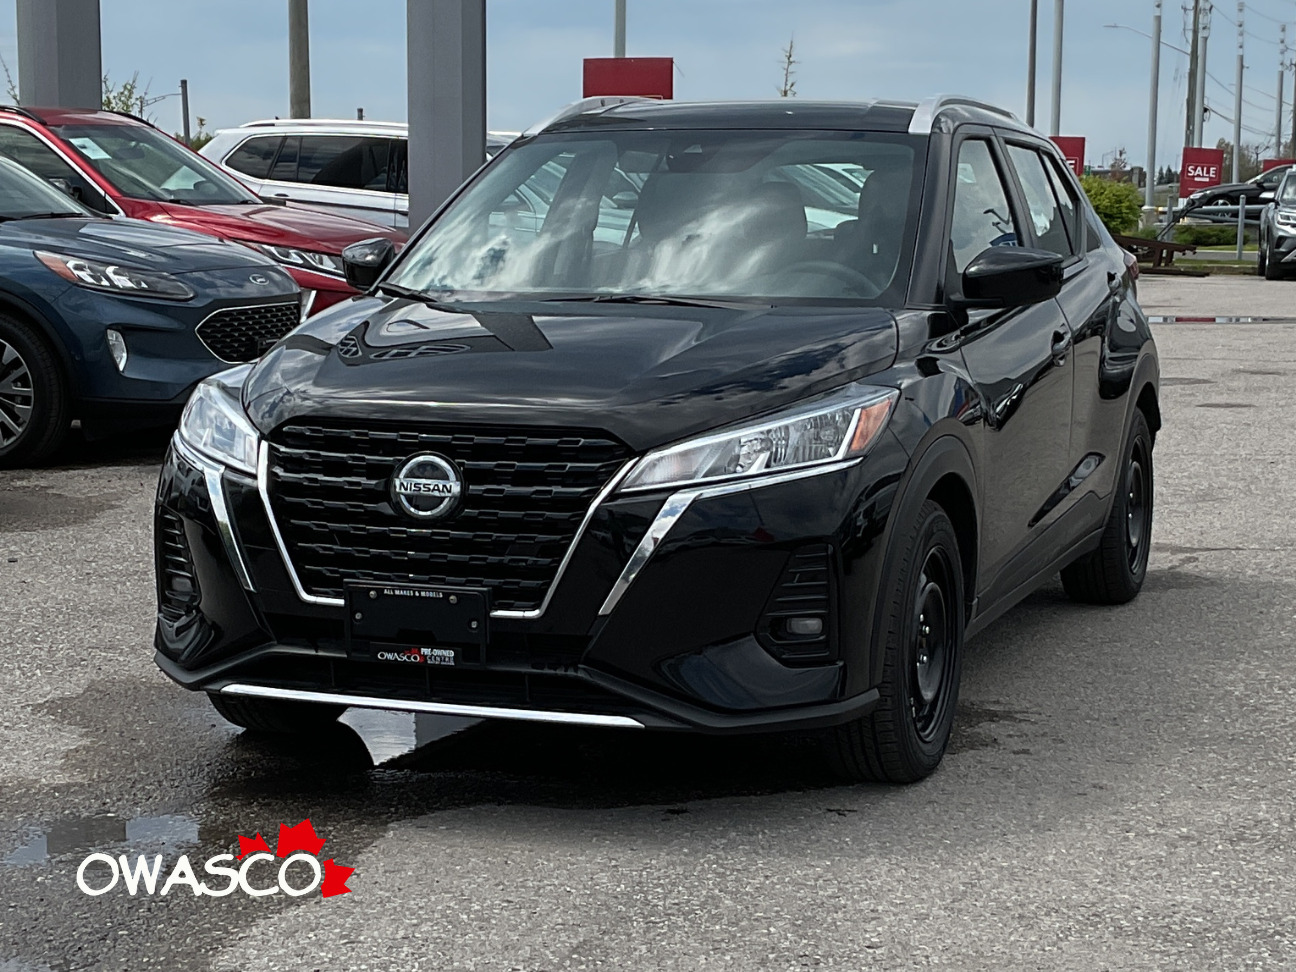 2021 Nissan Kicks 1.6L Excellent Shape! New Tires and Front Brakes!